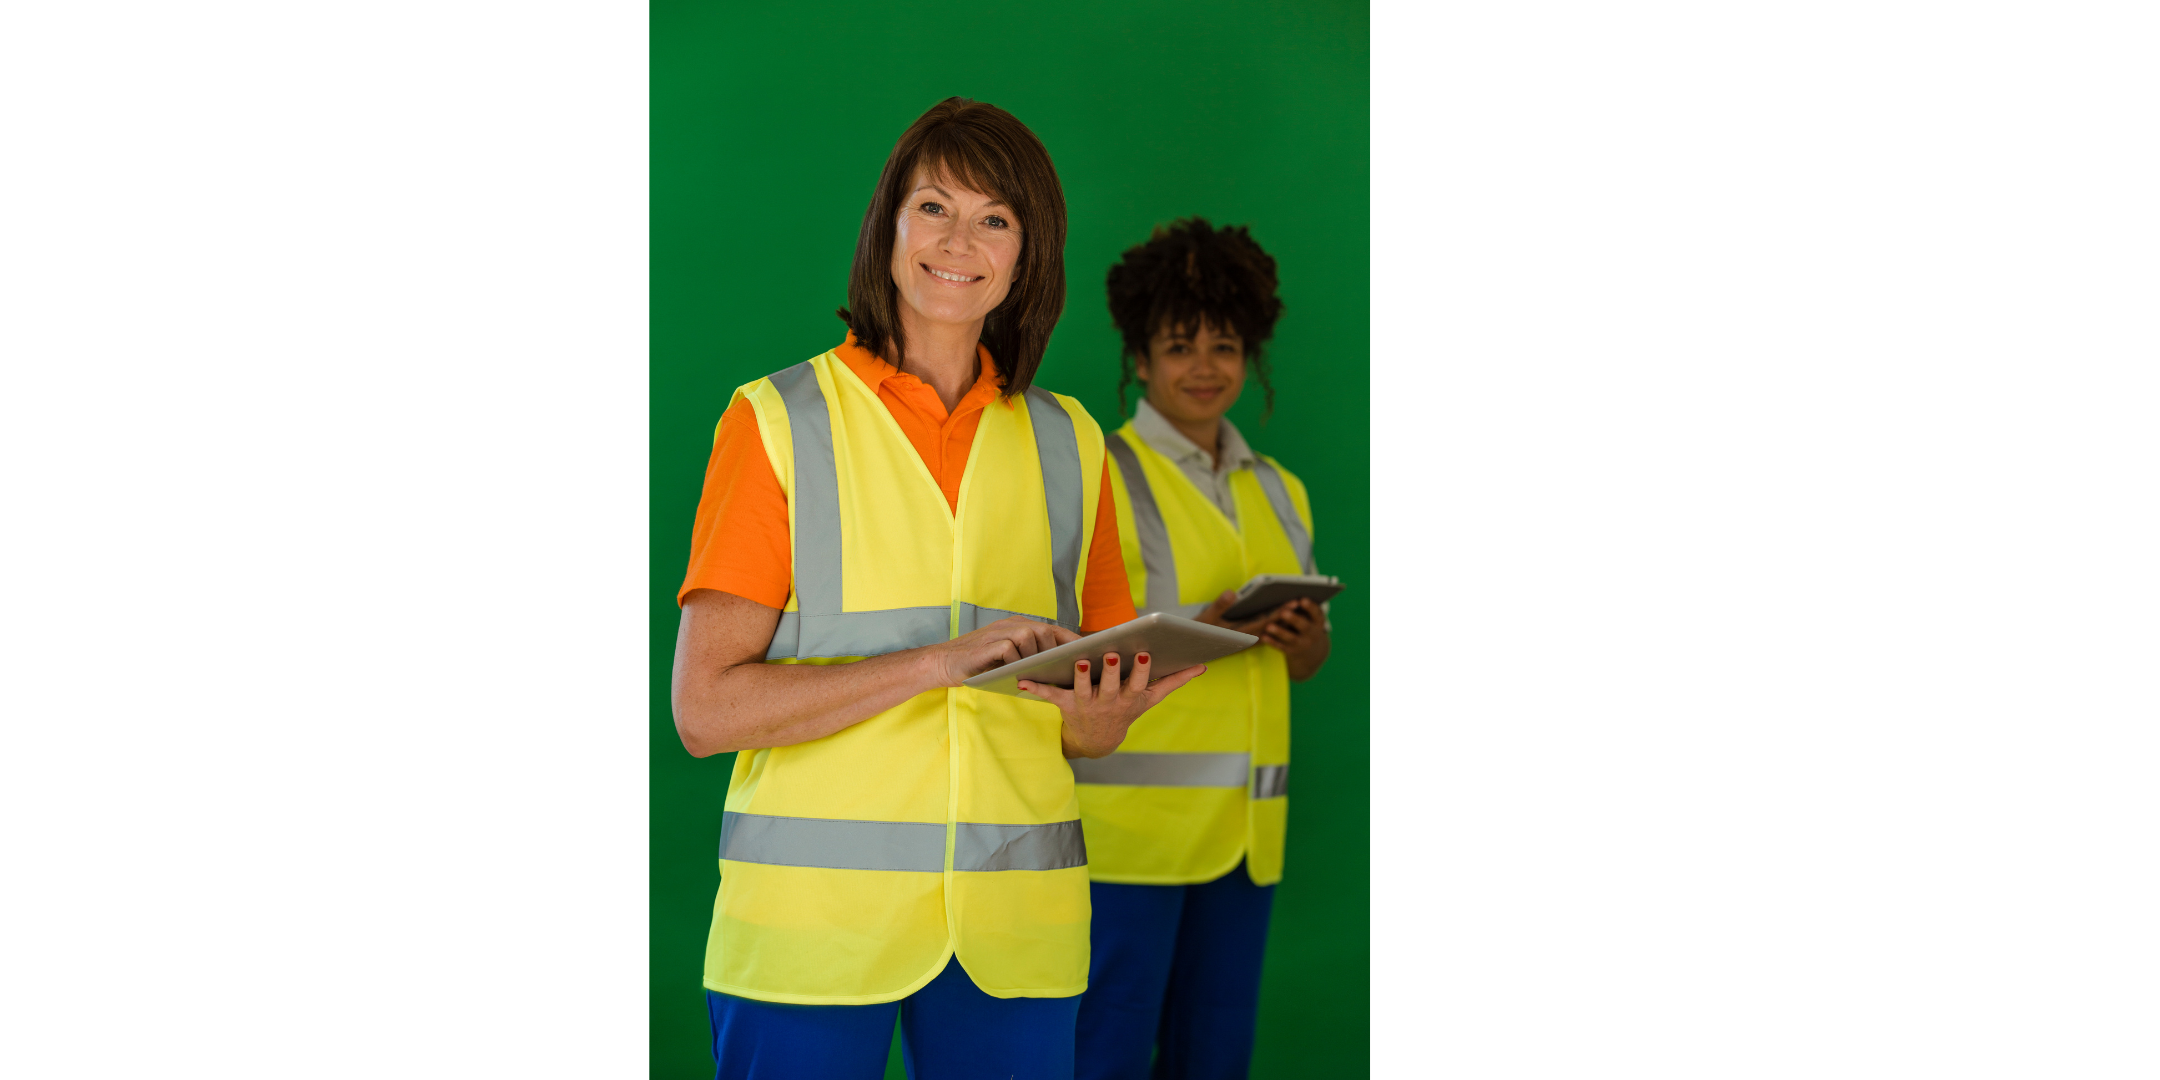 Two women with clipboards. Both wearing high vis vests and smiling.